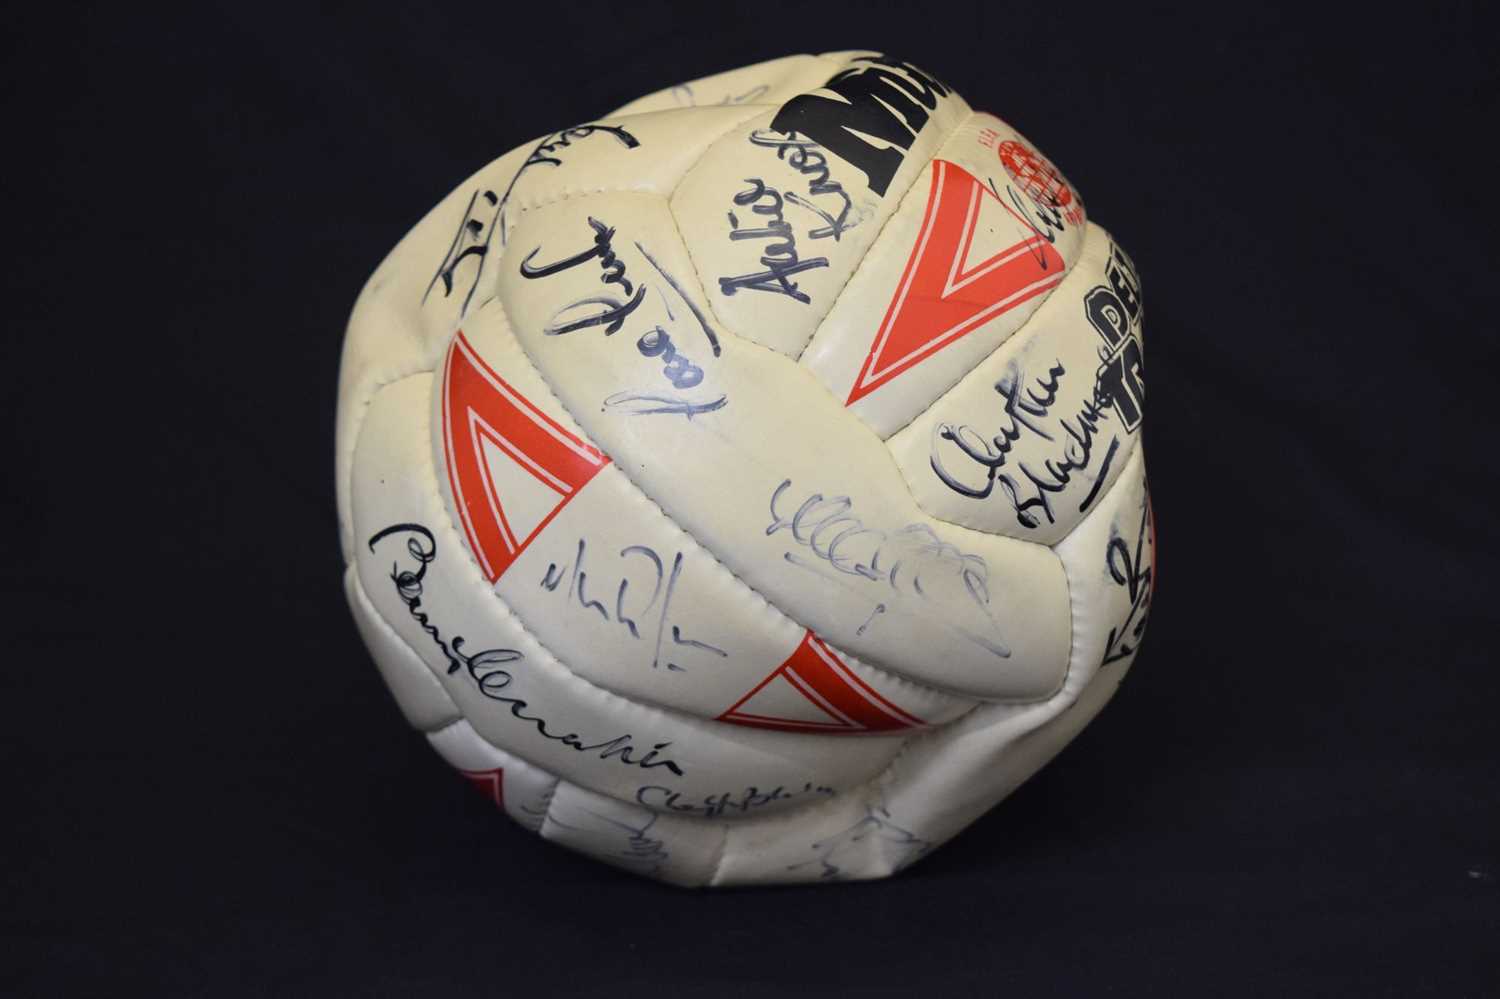 Manchester United autographed football - Image 3 of 7